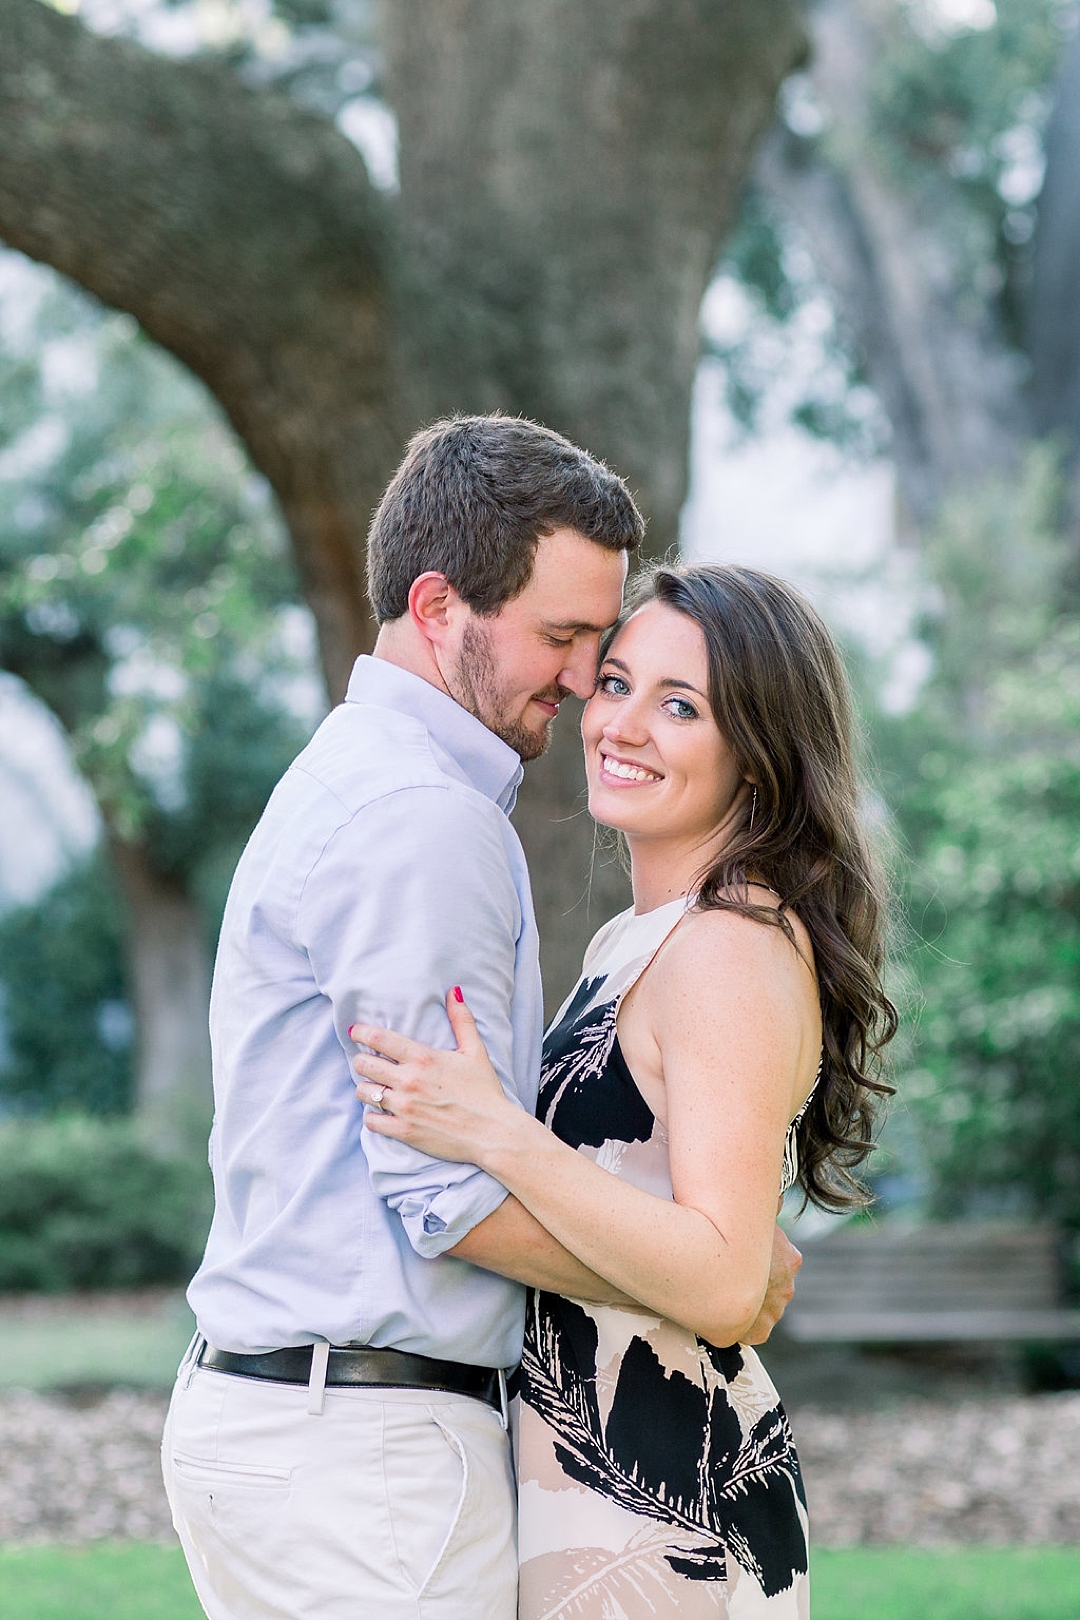 Downtown Savannah Square engagement photos by Top Georgia Wedding Photographer eigh Wolfe Photography